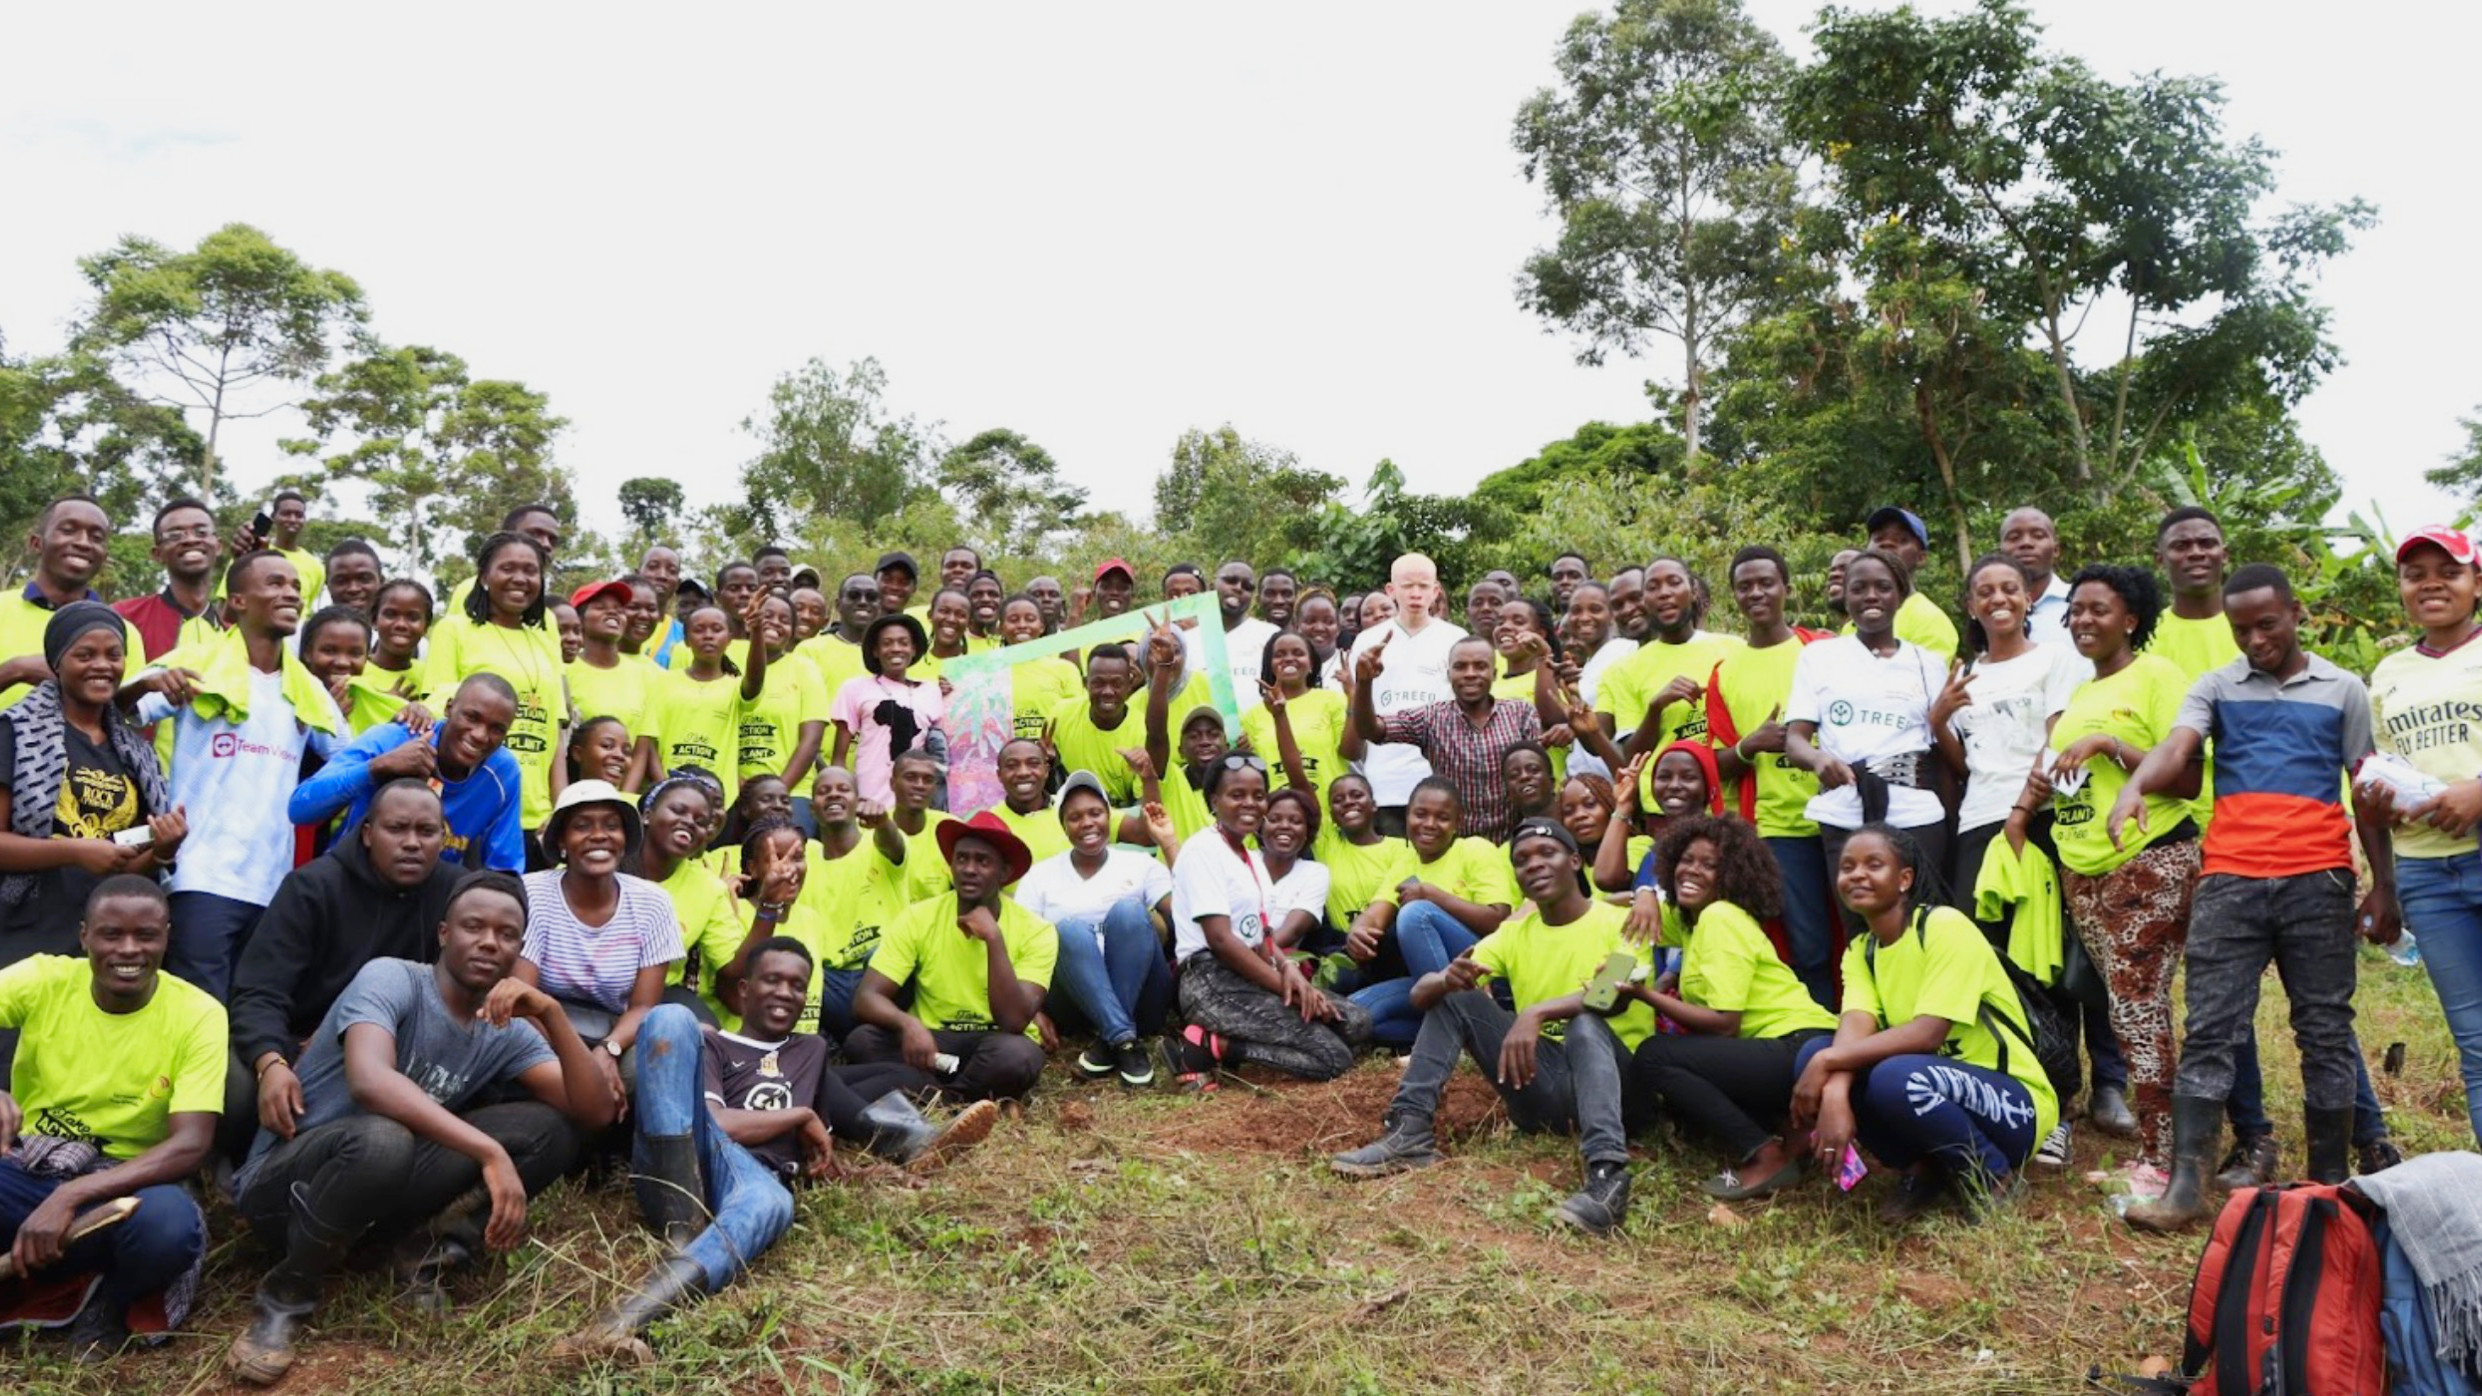 Group photo of participants of the planting event